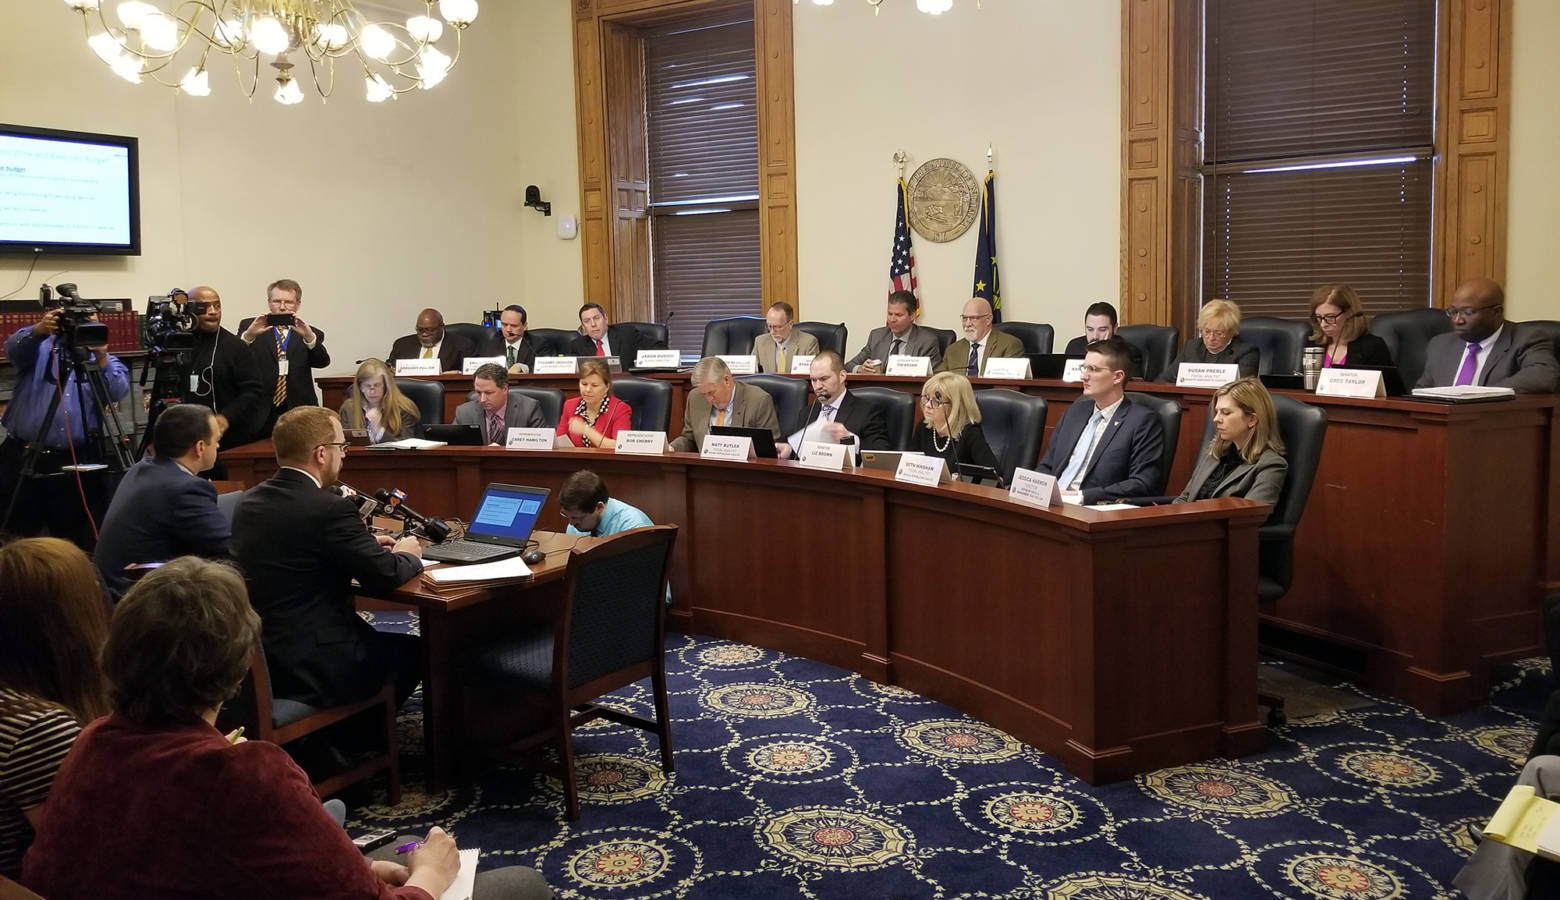 The State Budget Committee hears a presentation on Gov. Eric Holcomb's proposed budget from State Budget Director Jason Dudich and Office of Management and Budget Director Micah Vincent. (Jeanie Lindsay/IPB News)